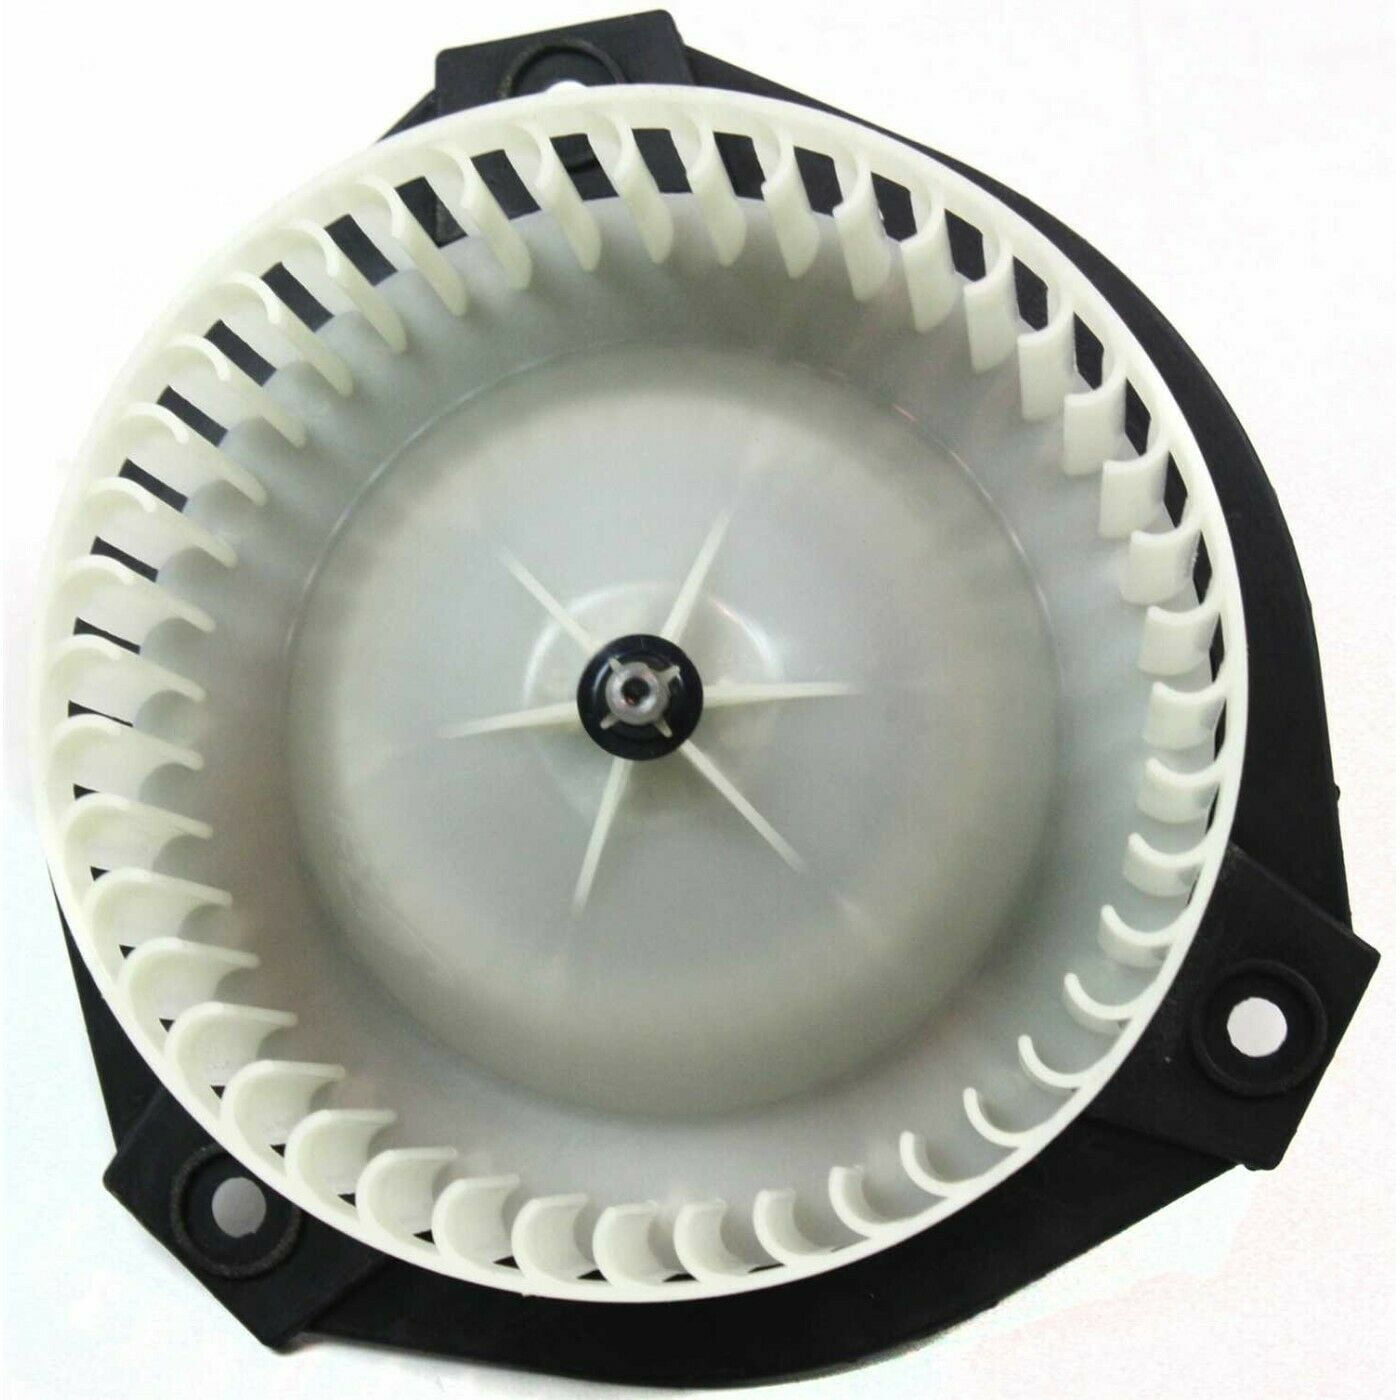 A/C Heater Blower Motor w/ Fan Cage 8890187470 for Isuzu Saab Buick Chevy Olds